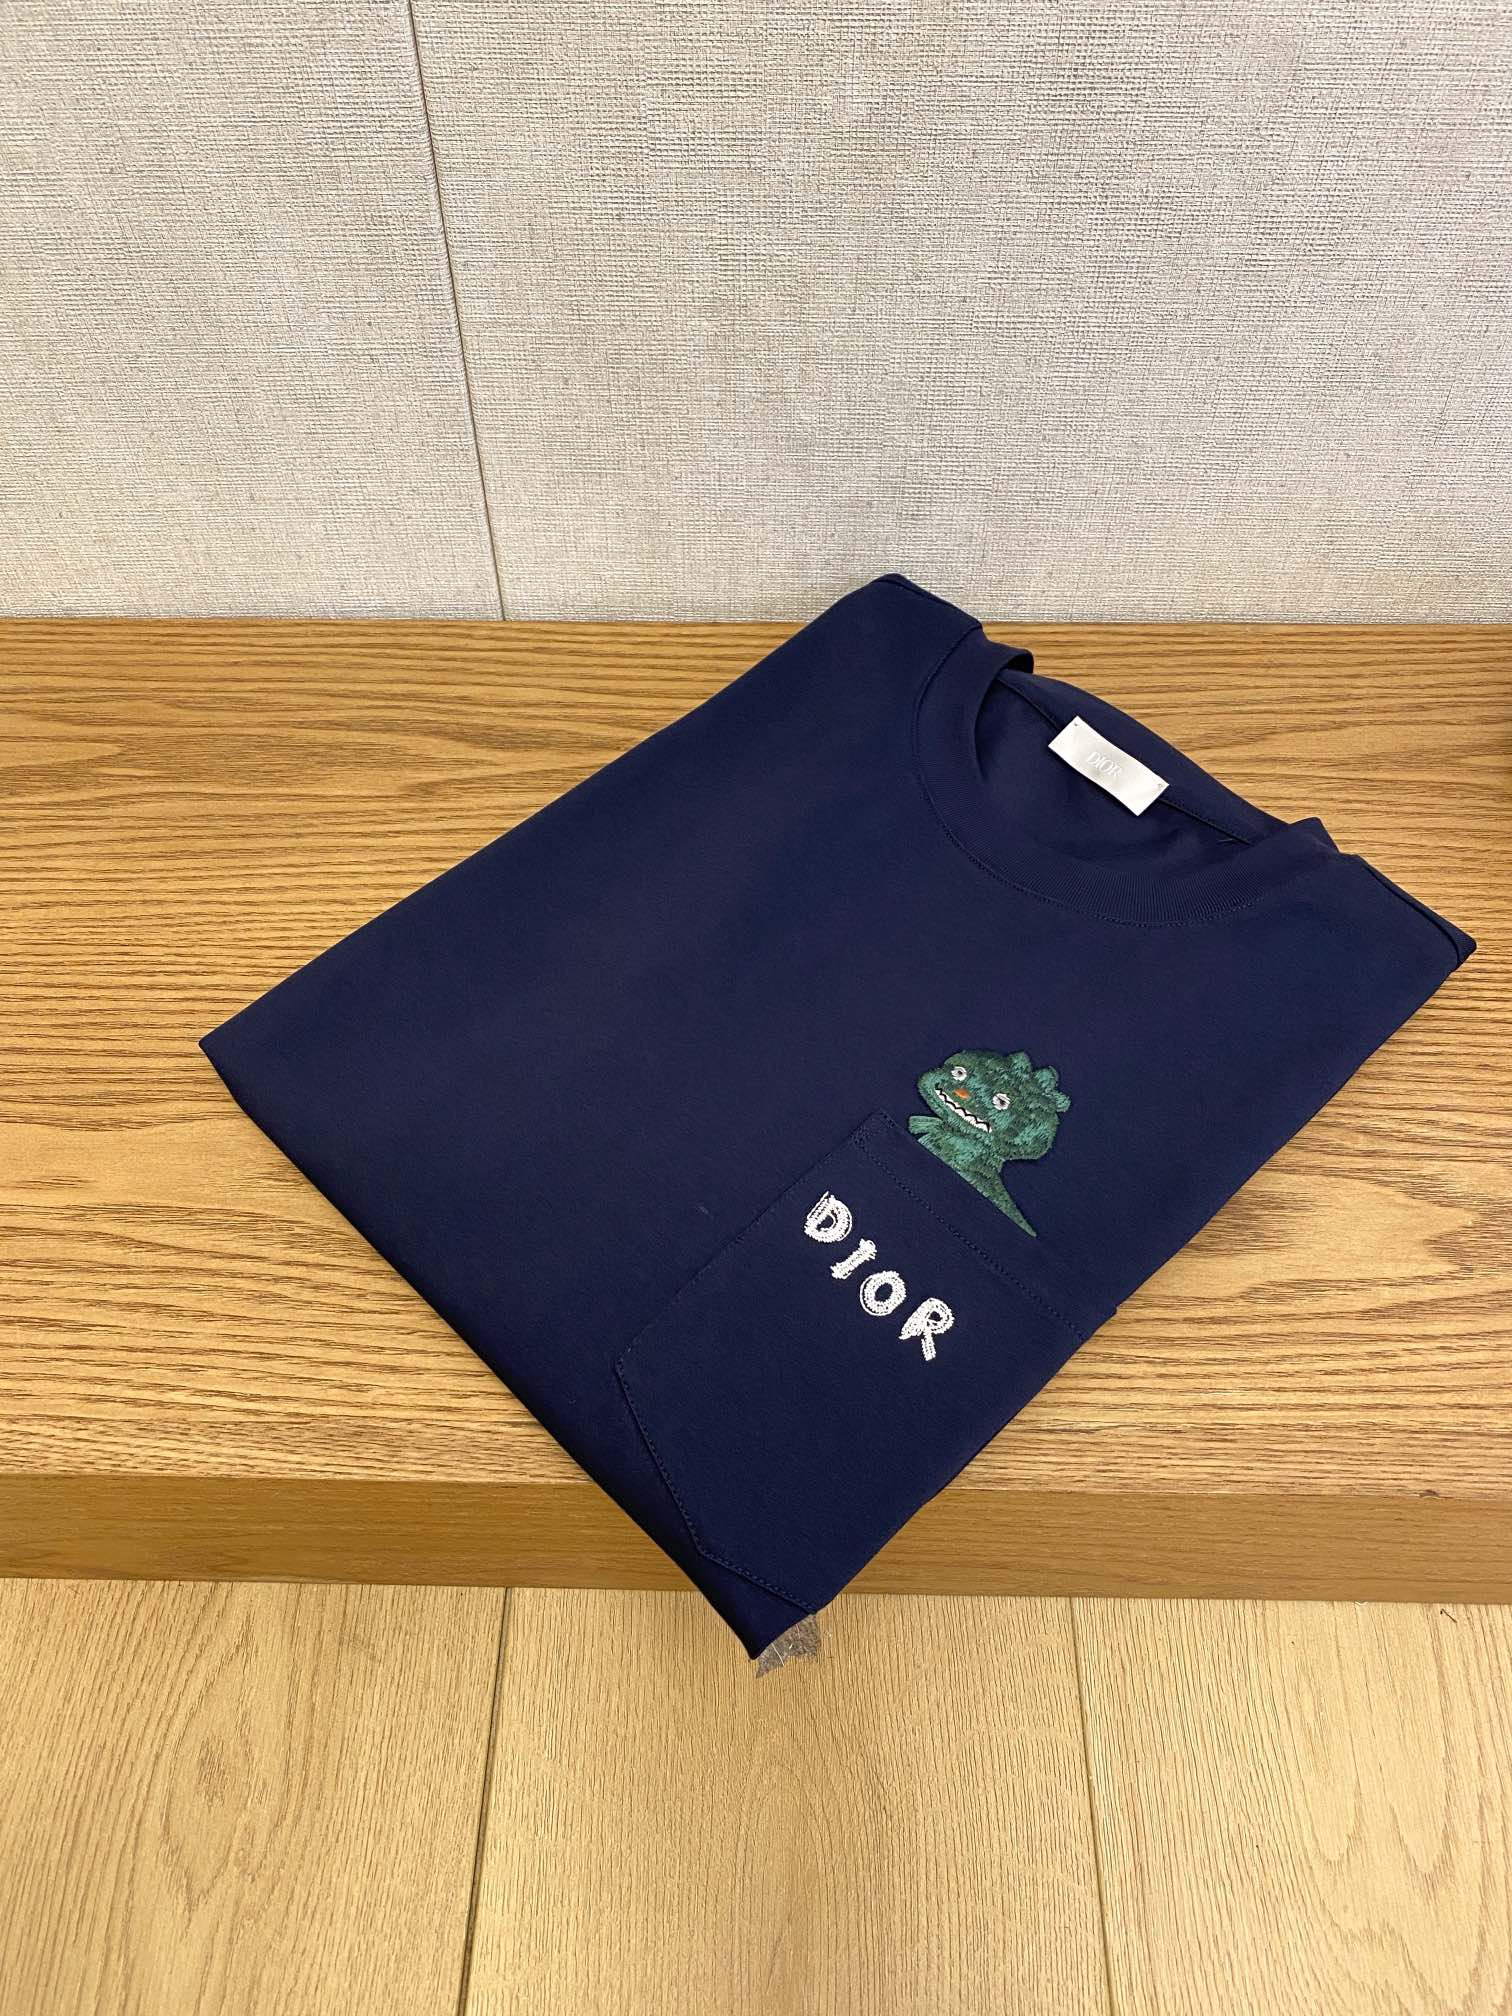 Dior Clothing T-Shirt Embroidery Cotton Fashion Short Sleeve